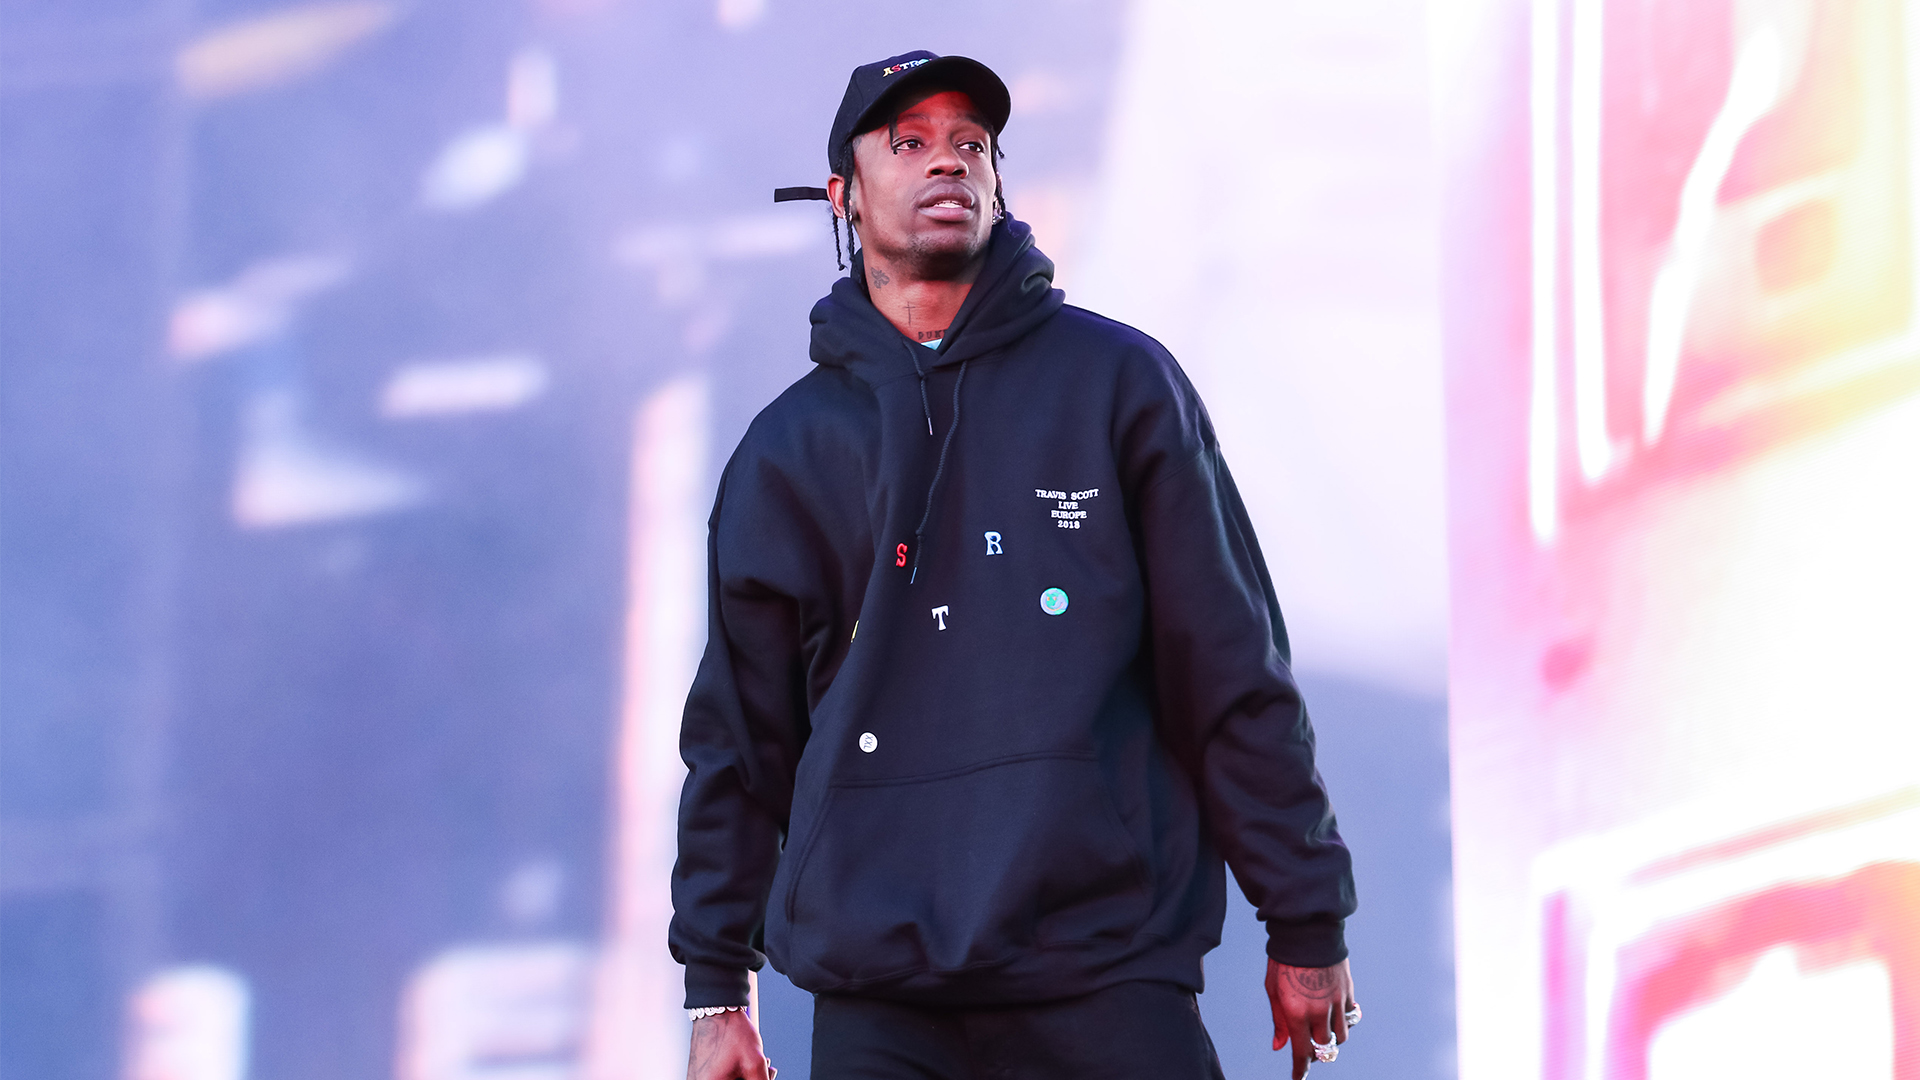 Travis Scott's New Project HEAL Includes $1M In Scholarships For HBCU Students